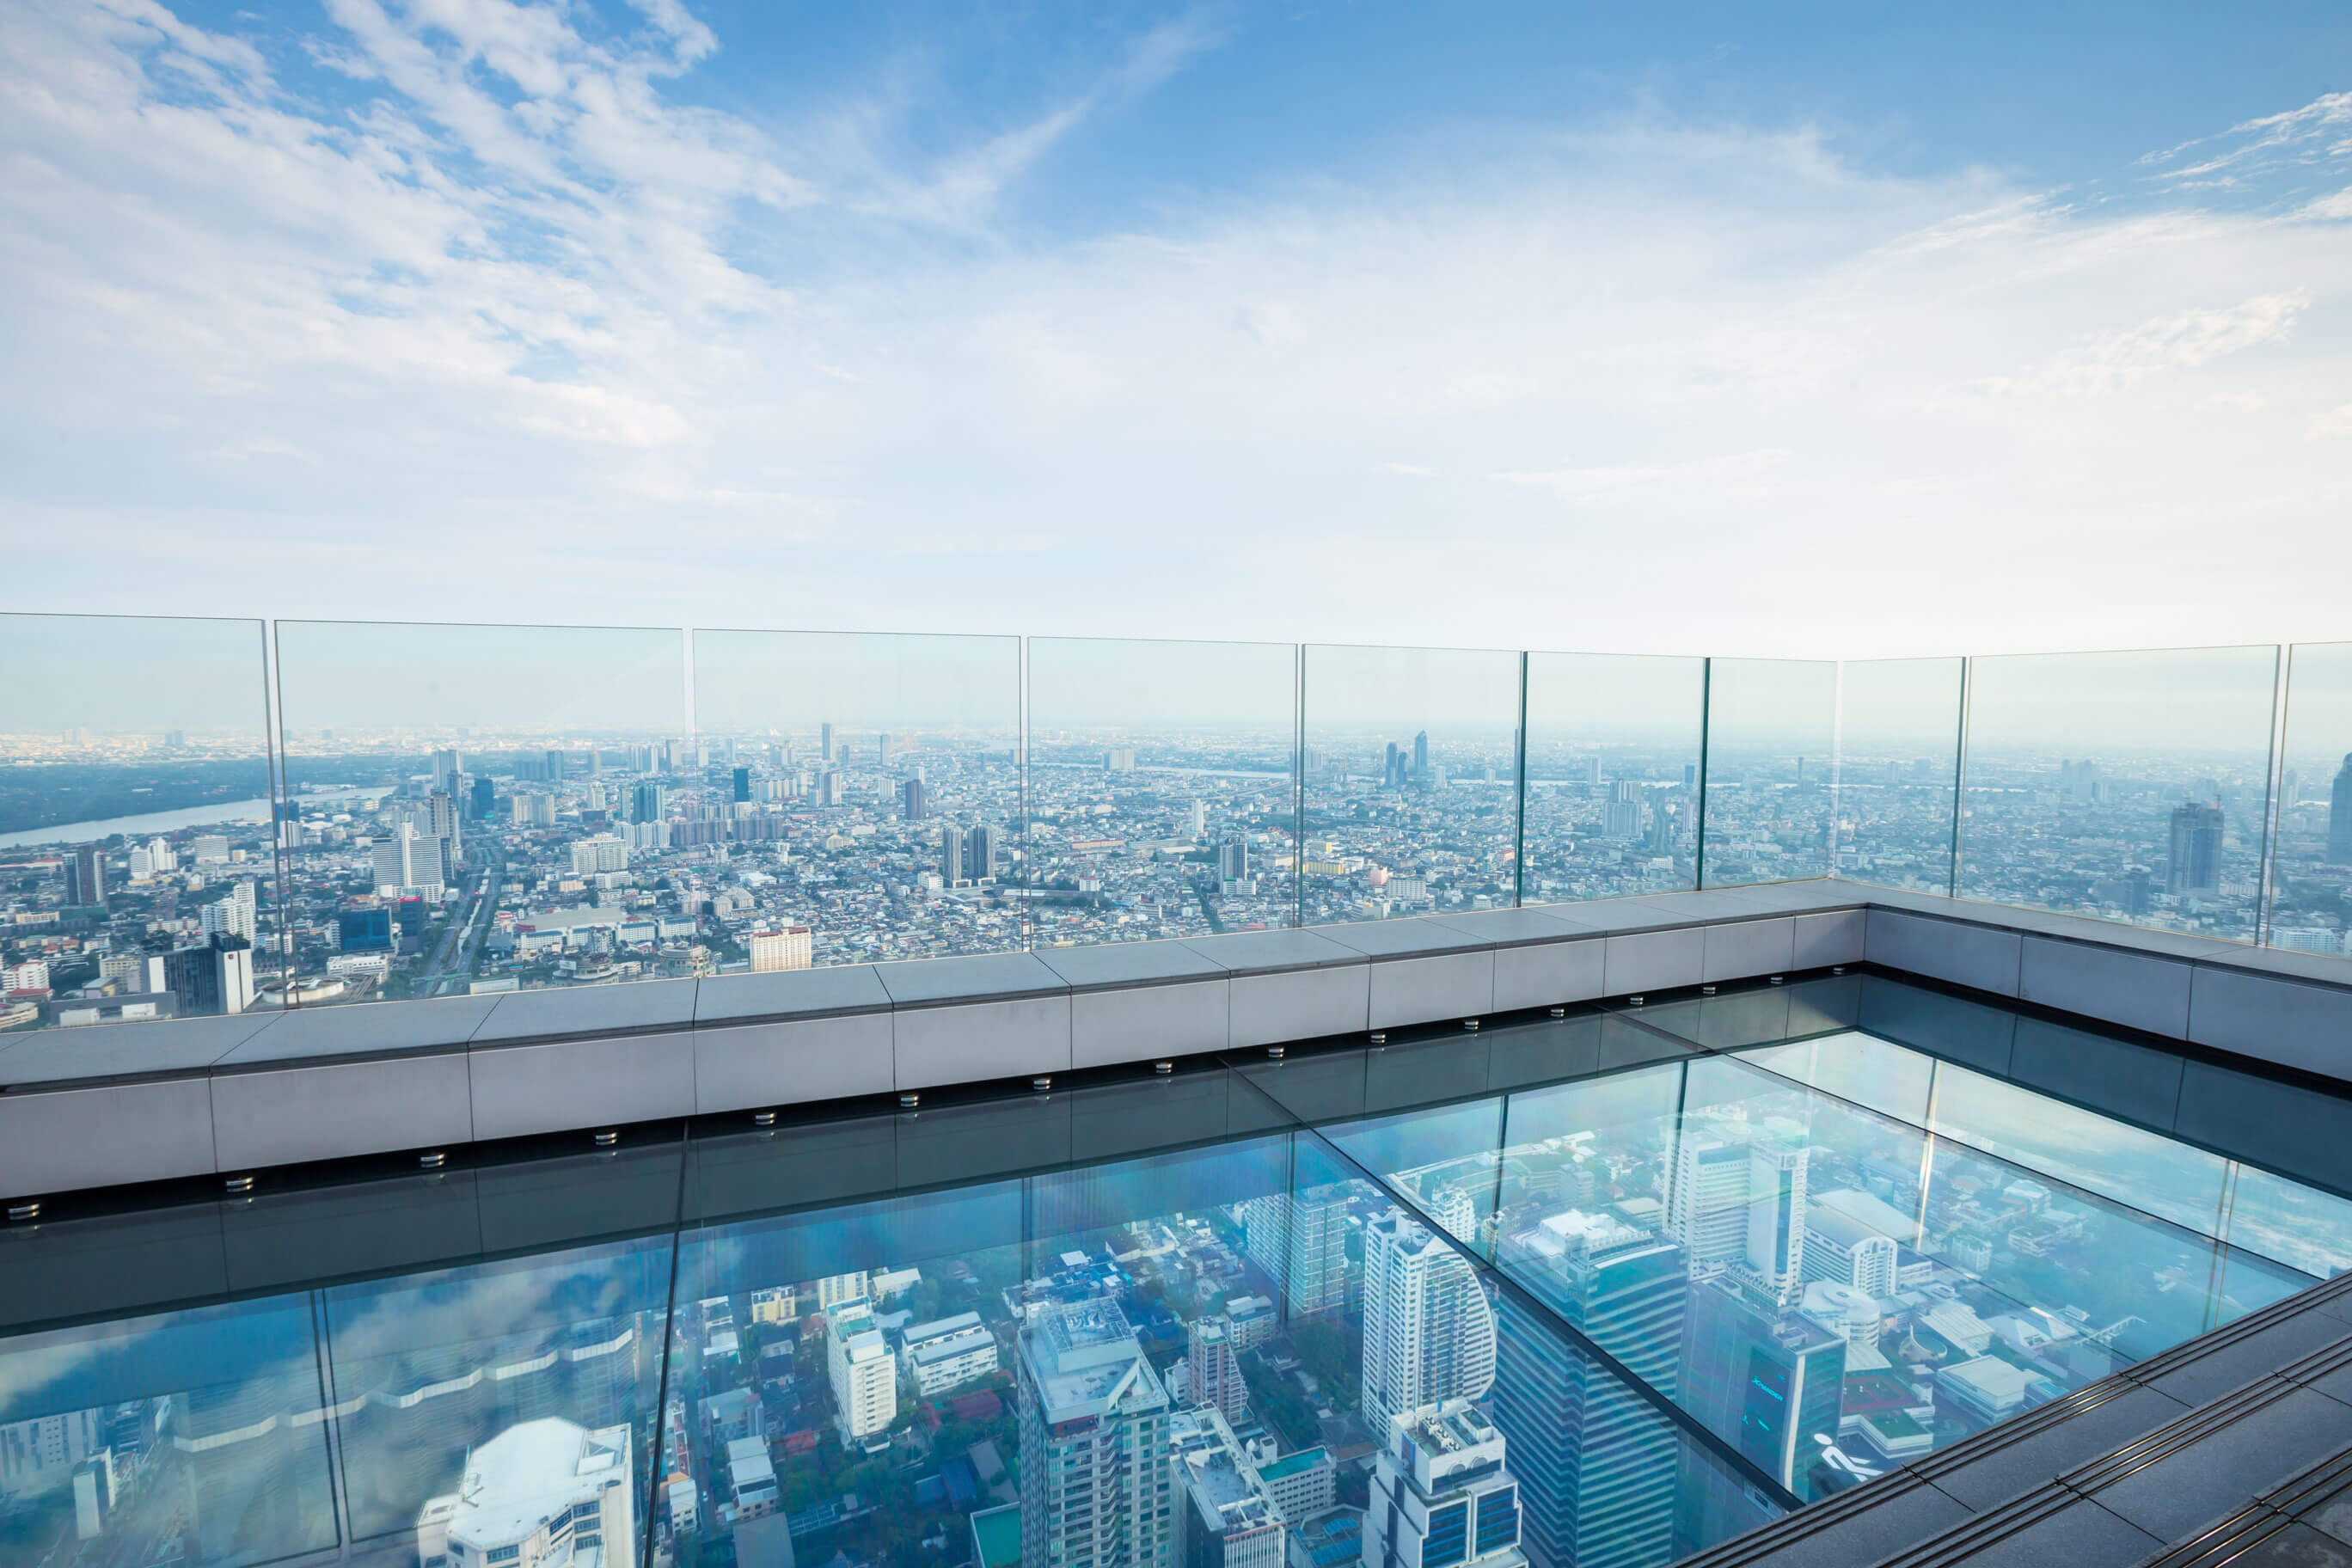 The view of city skyline from the glass tray of Mahanakhon SkyWalk